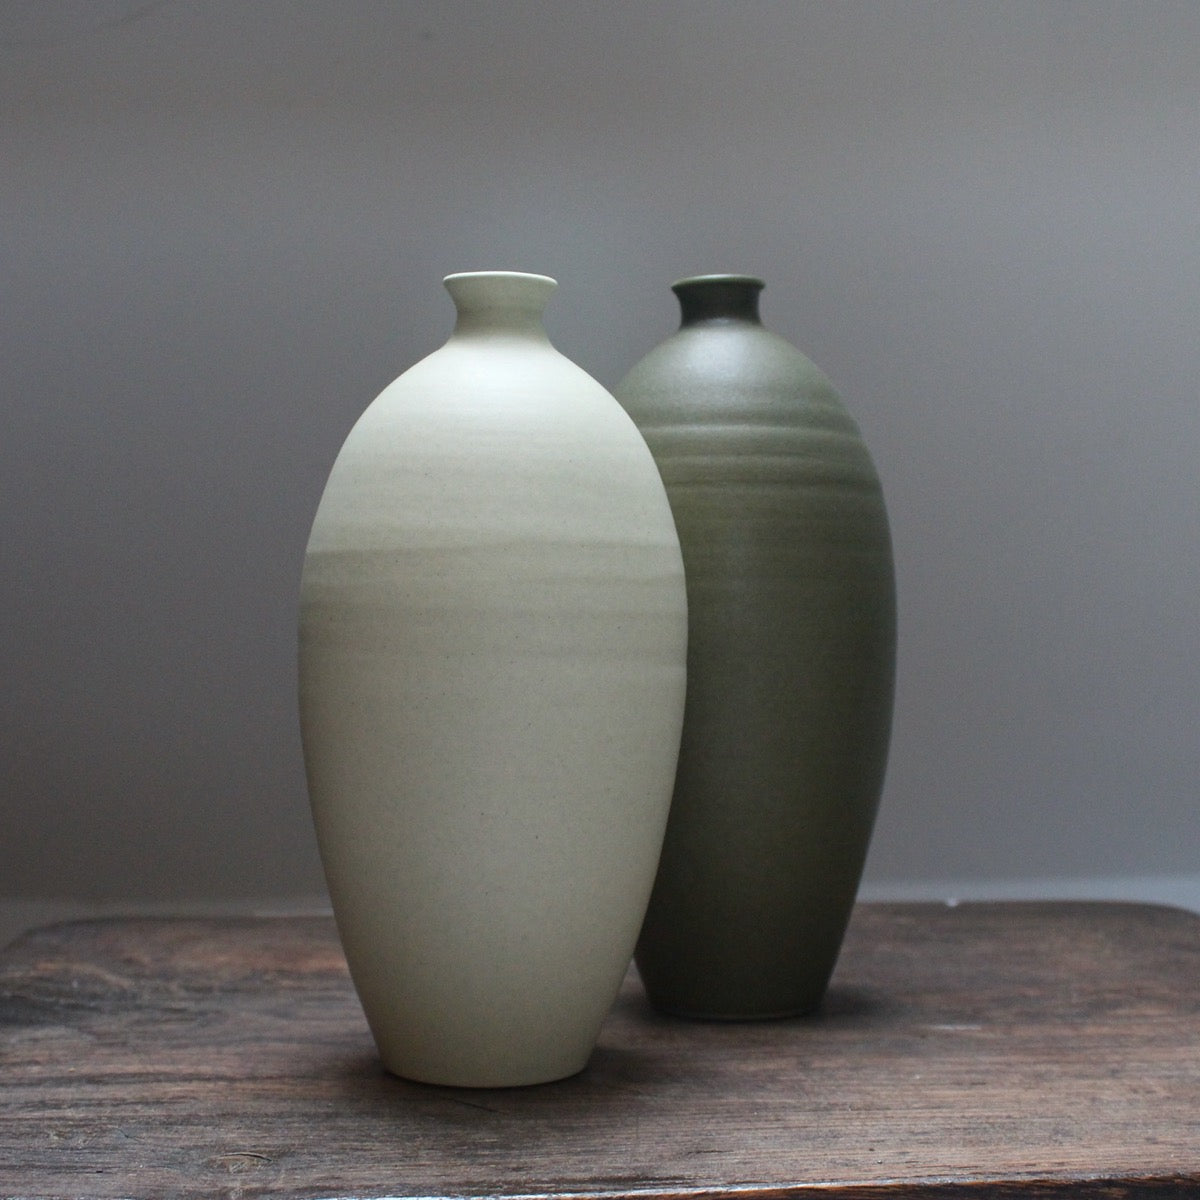 A pale green and a dark green ceramic bottle side by side on a wooden table 